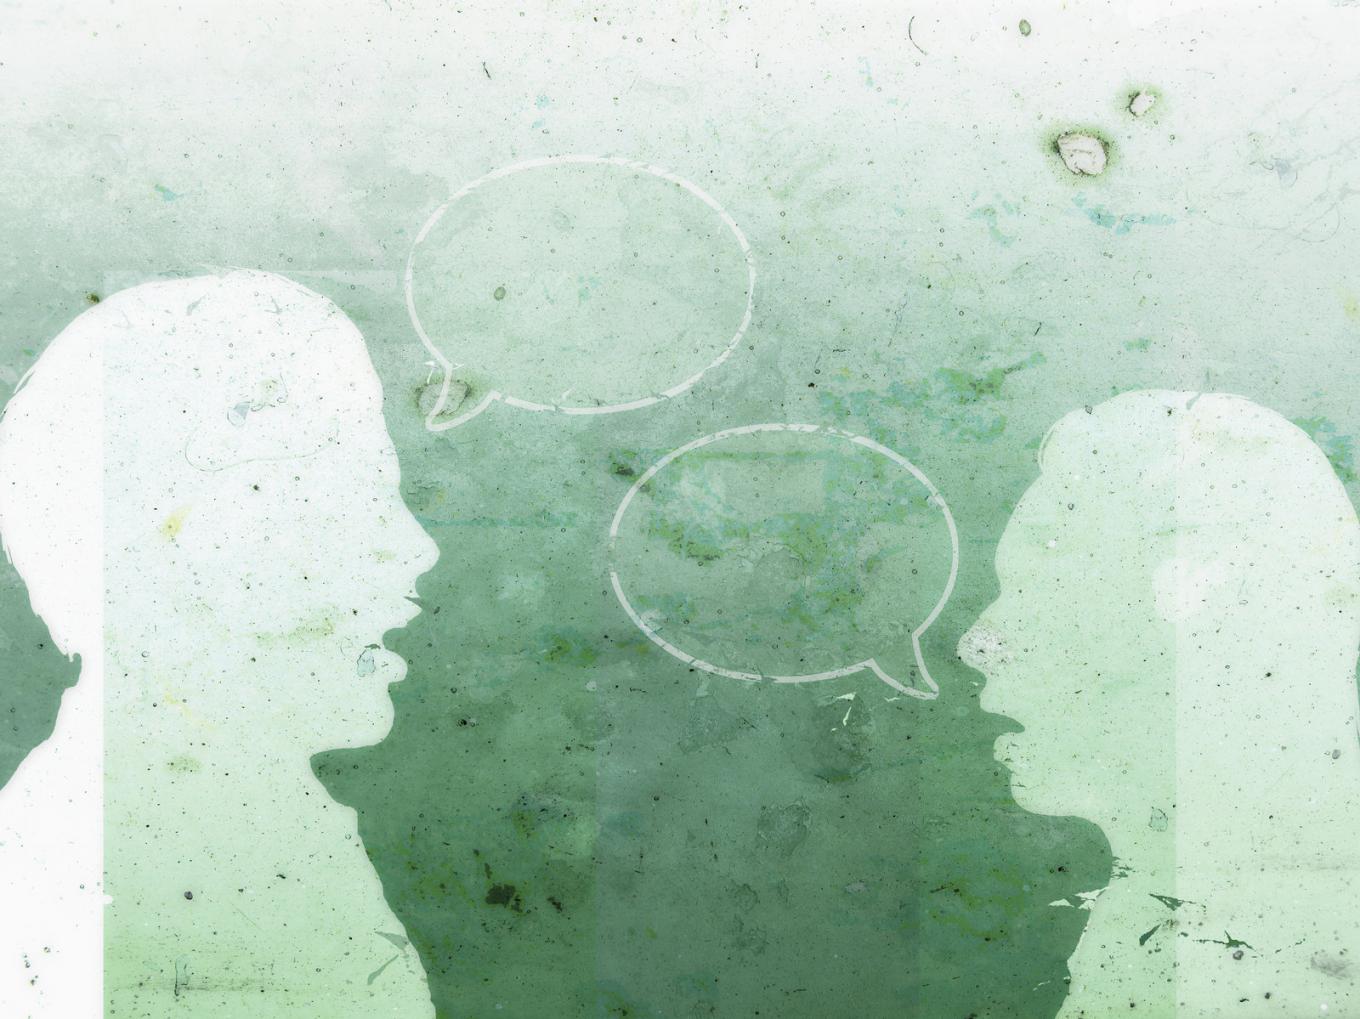 Silhouettes of two people in conversation, with empty speech bubbles floating between them